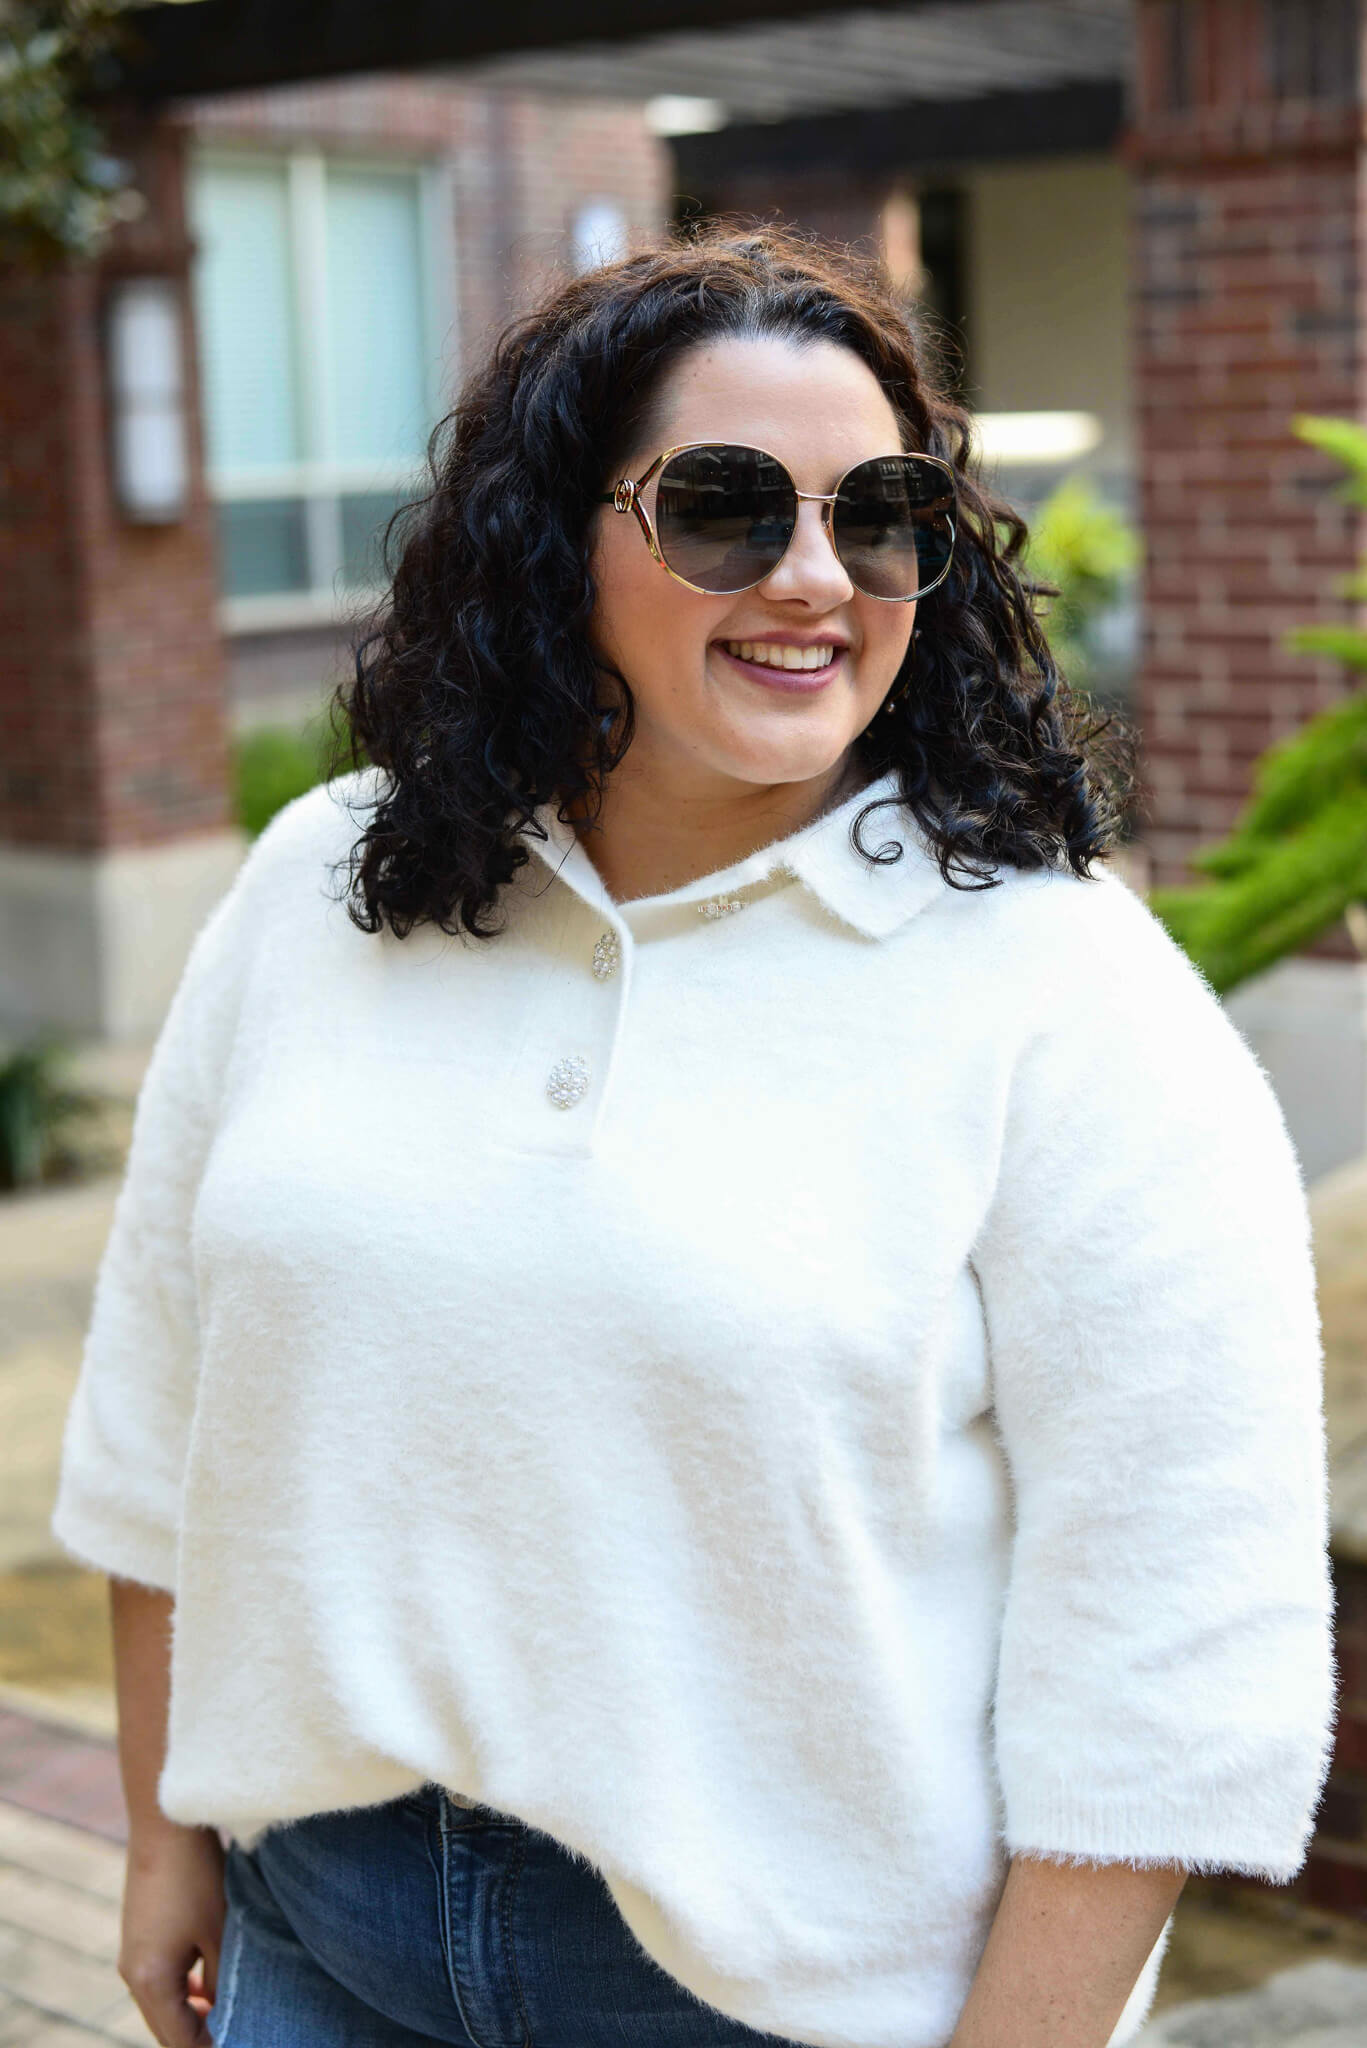 Plus size Thanksgiving dinner outfit